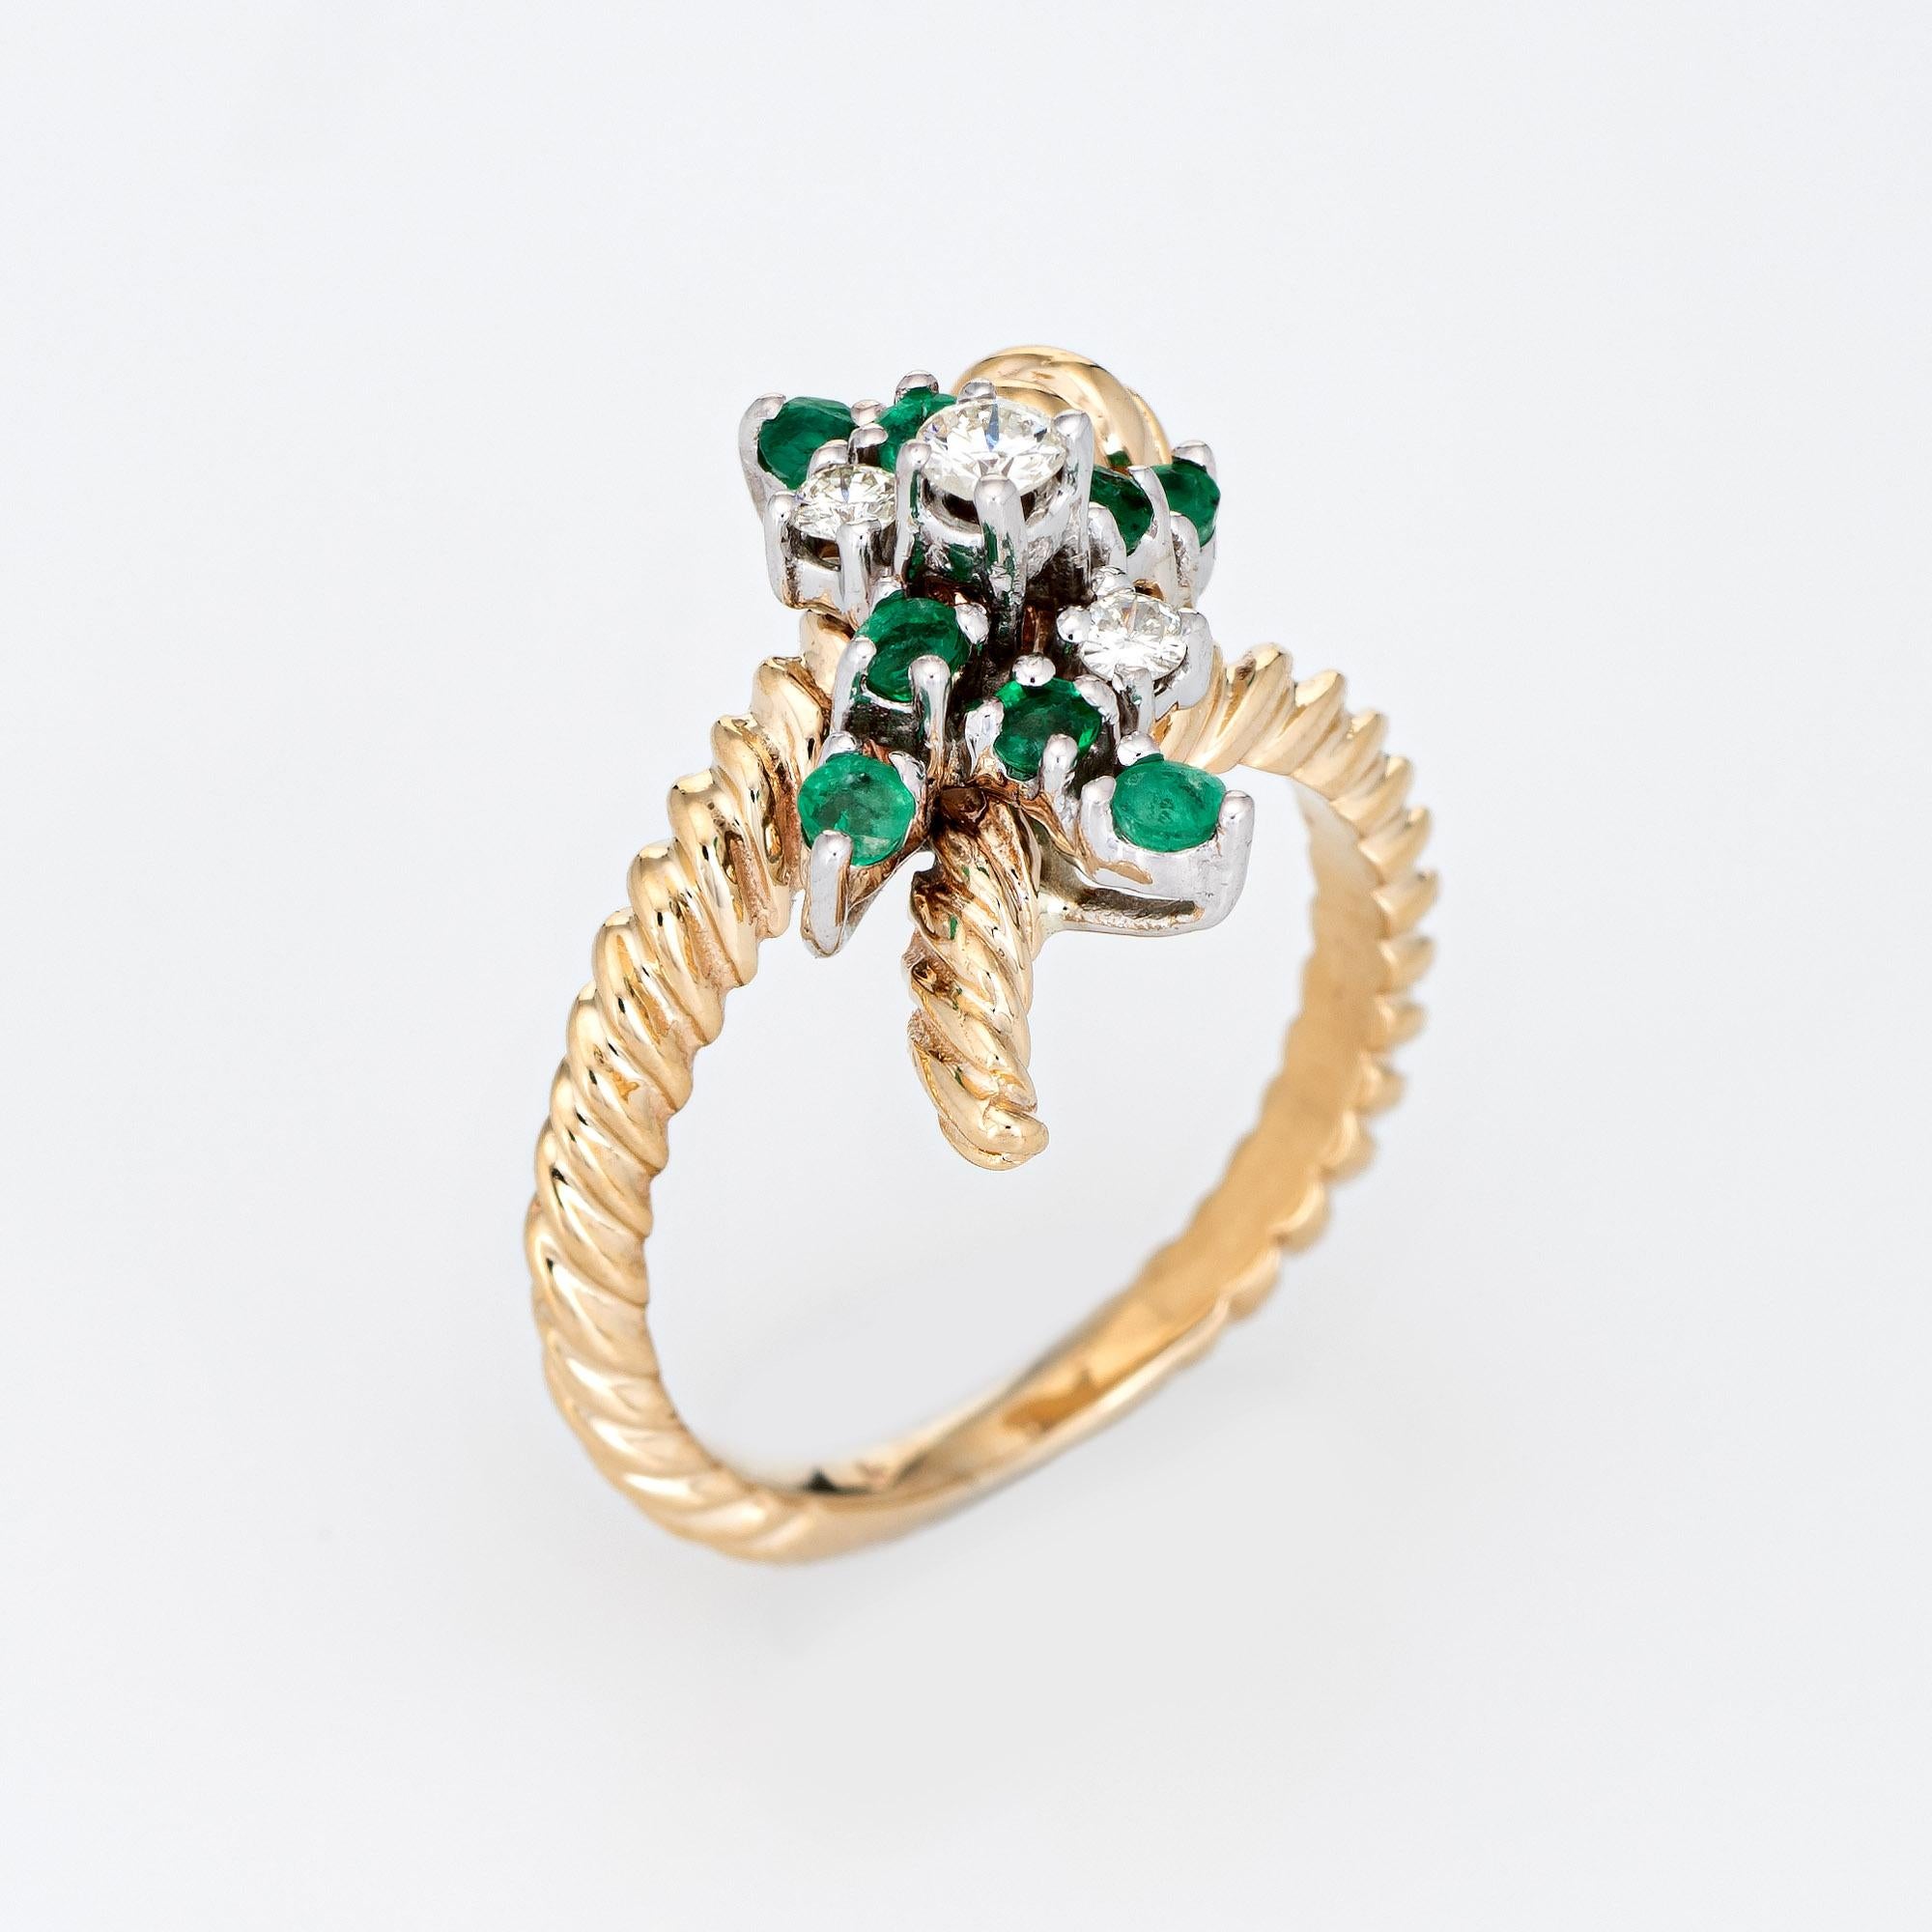 Stylish vintage emerald & diamond cocktail ring (circa 1960s to 1970s) crafted in 14 karat yellow gold. 

3 diamonds total an estimated 0.10 carats (estimated at I-J color and SI1 clarity), accented with 8 emeralds that total an estimated 0.16